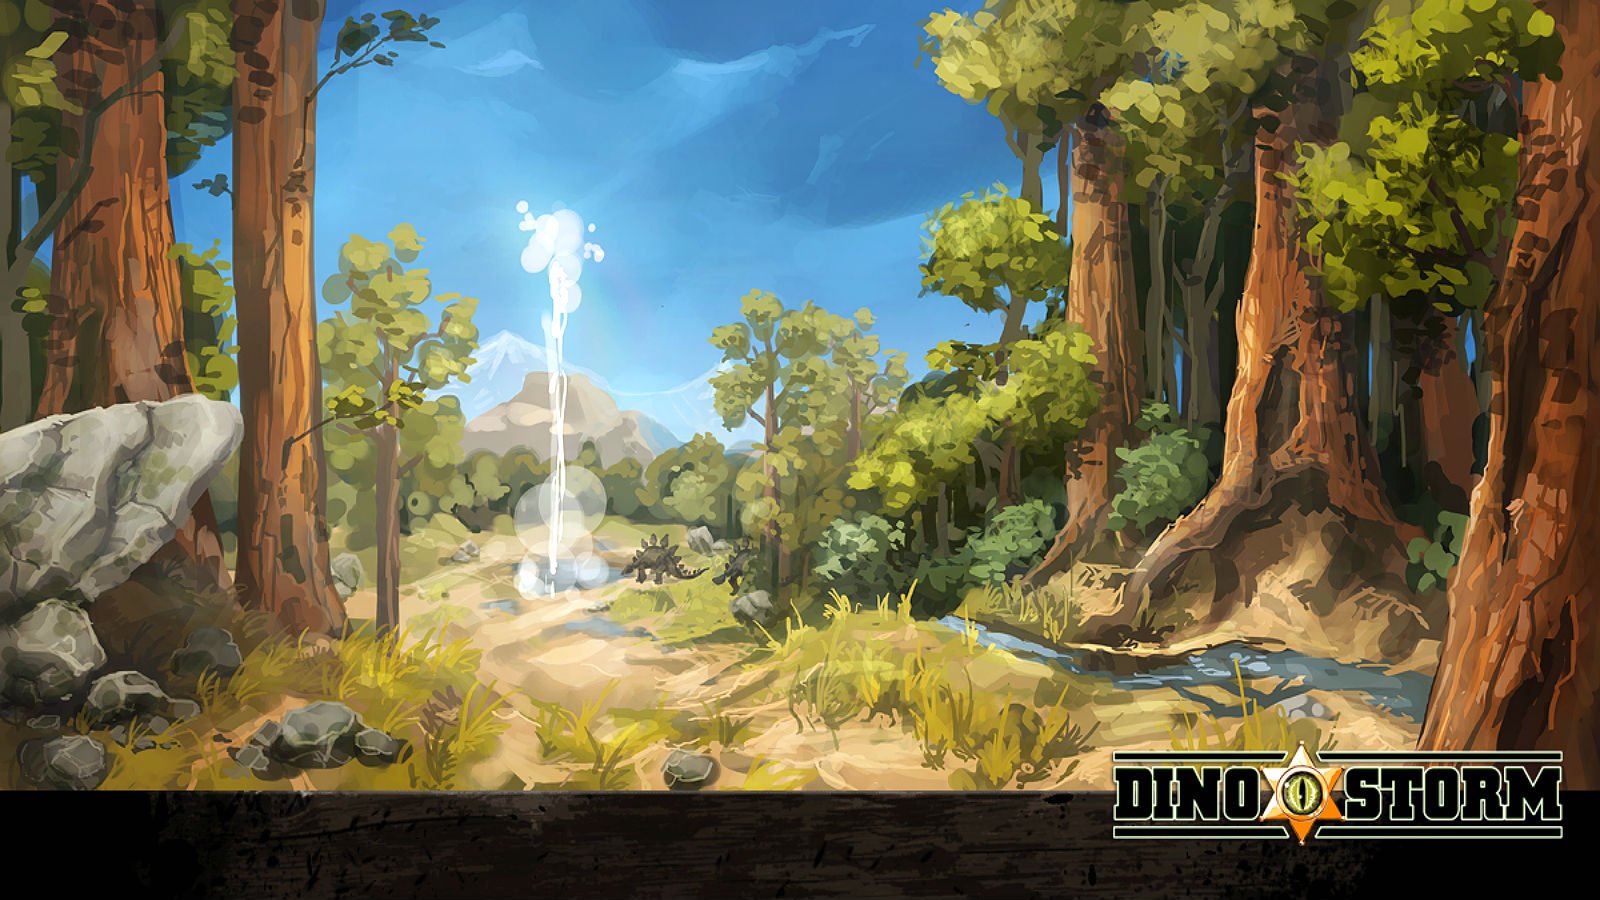 dino, Storm, Dinosaur, Fantasy, Mmo, Online, Monster, Creature, 1dinos, Action, Adventure, Cowboty, Western, Shooter, Poster Wallpaper